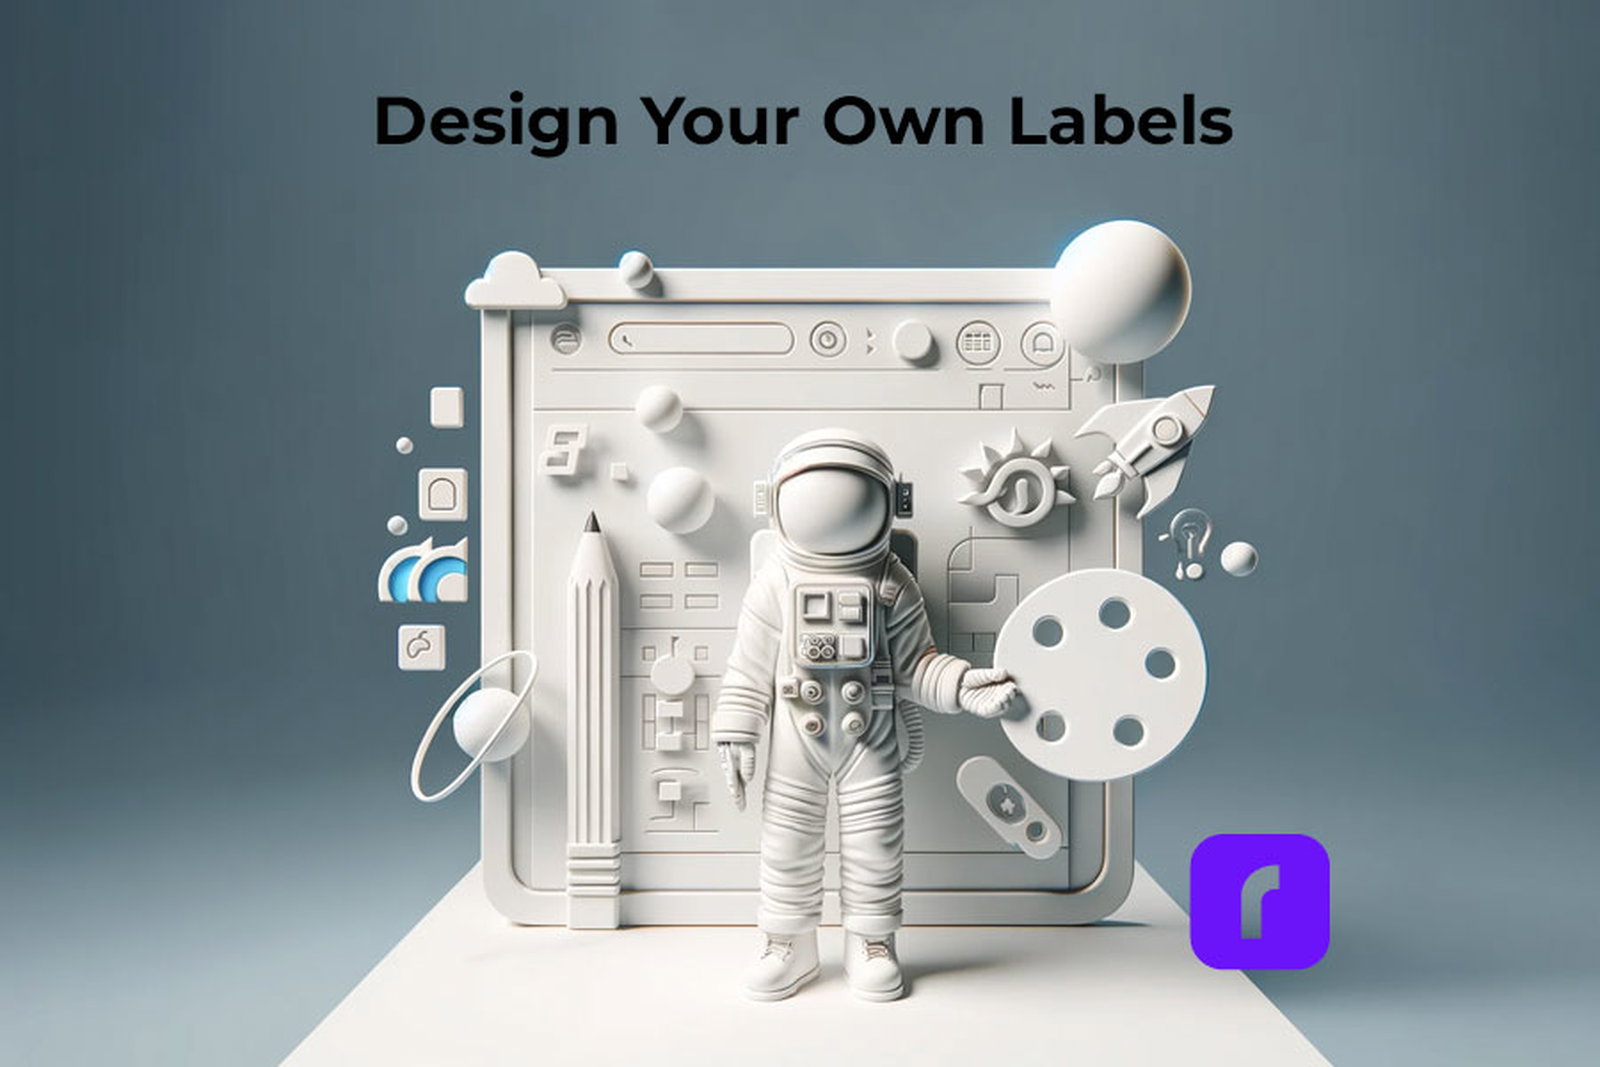 Design Your Own Labels and Print Them Directly - FOR FREE